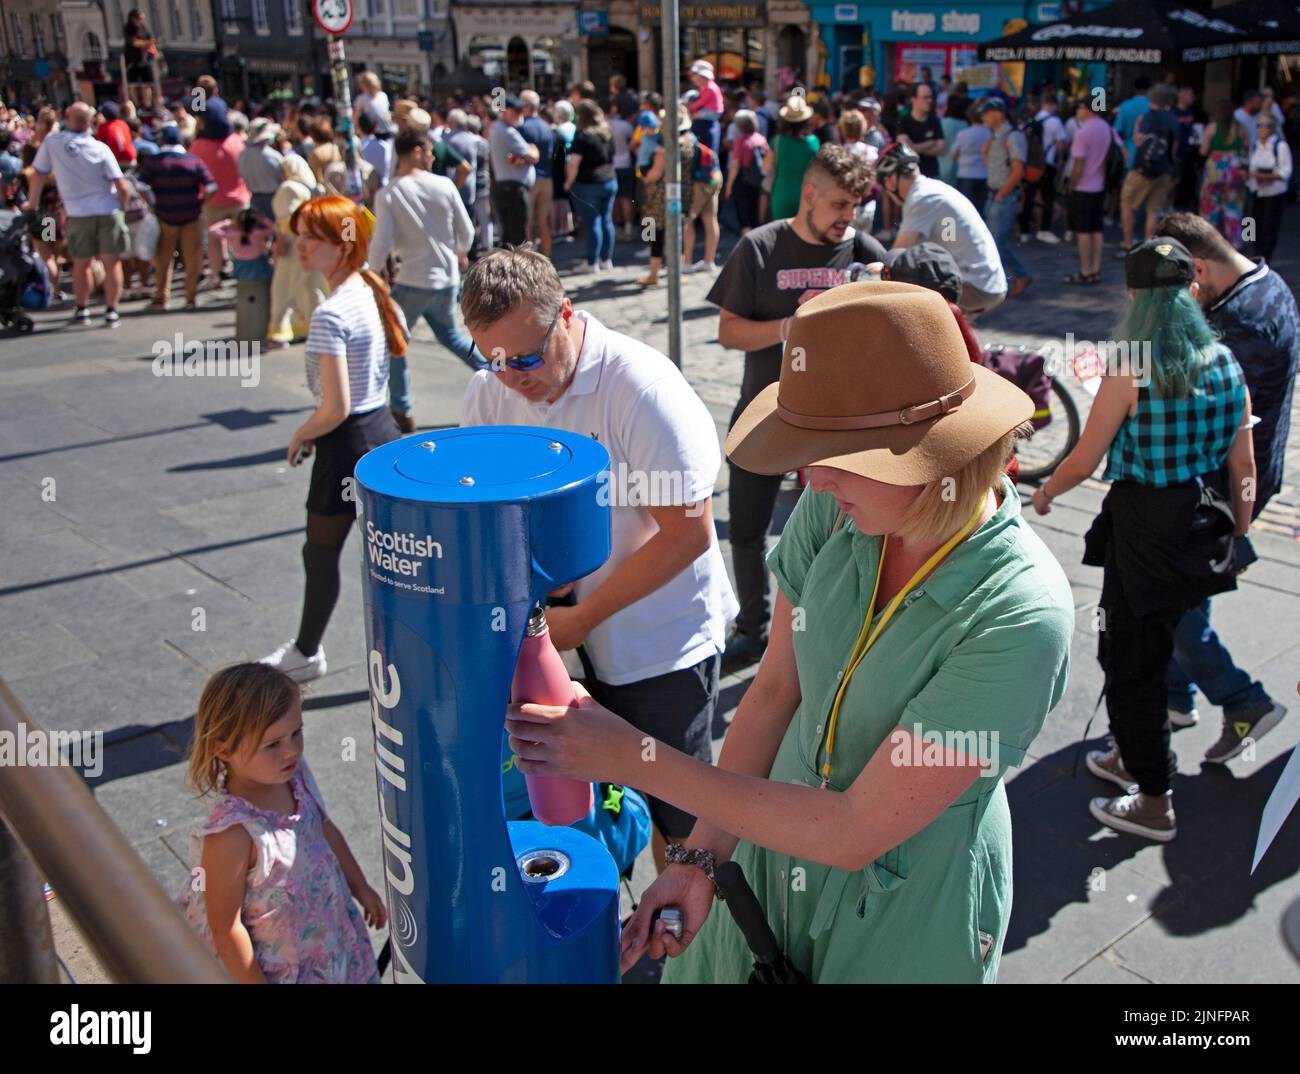 City Centre, Edinburgh, Scotland, UK. 11th August 2022. EdFringe 6th Day on the Royal Mile keeping busy with crowds of people looking for entertainment. Weather 27 degrees centigrade had people looking to top up water bottles and to find shade in the ciy's gardens. Family stop to fill water bottles to assist with rehydration in the very hot weather. Credit: Arch White/alamy live news. Stock Photo